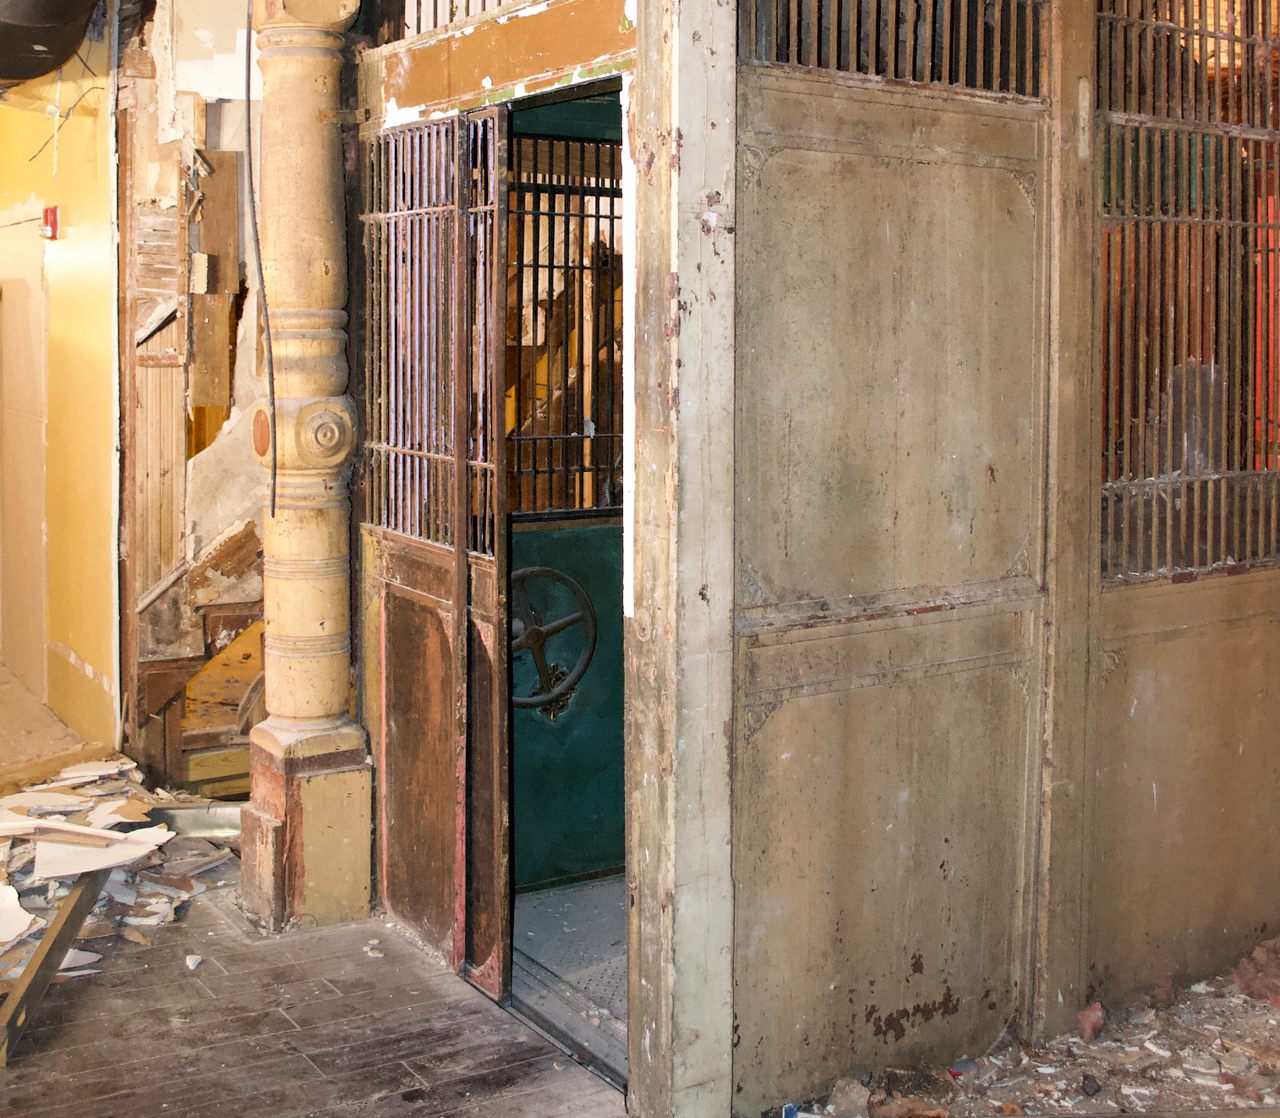 Behind some drywall emerged the building's long-forgotten original elevator. 